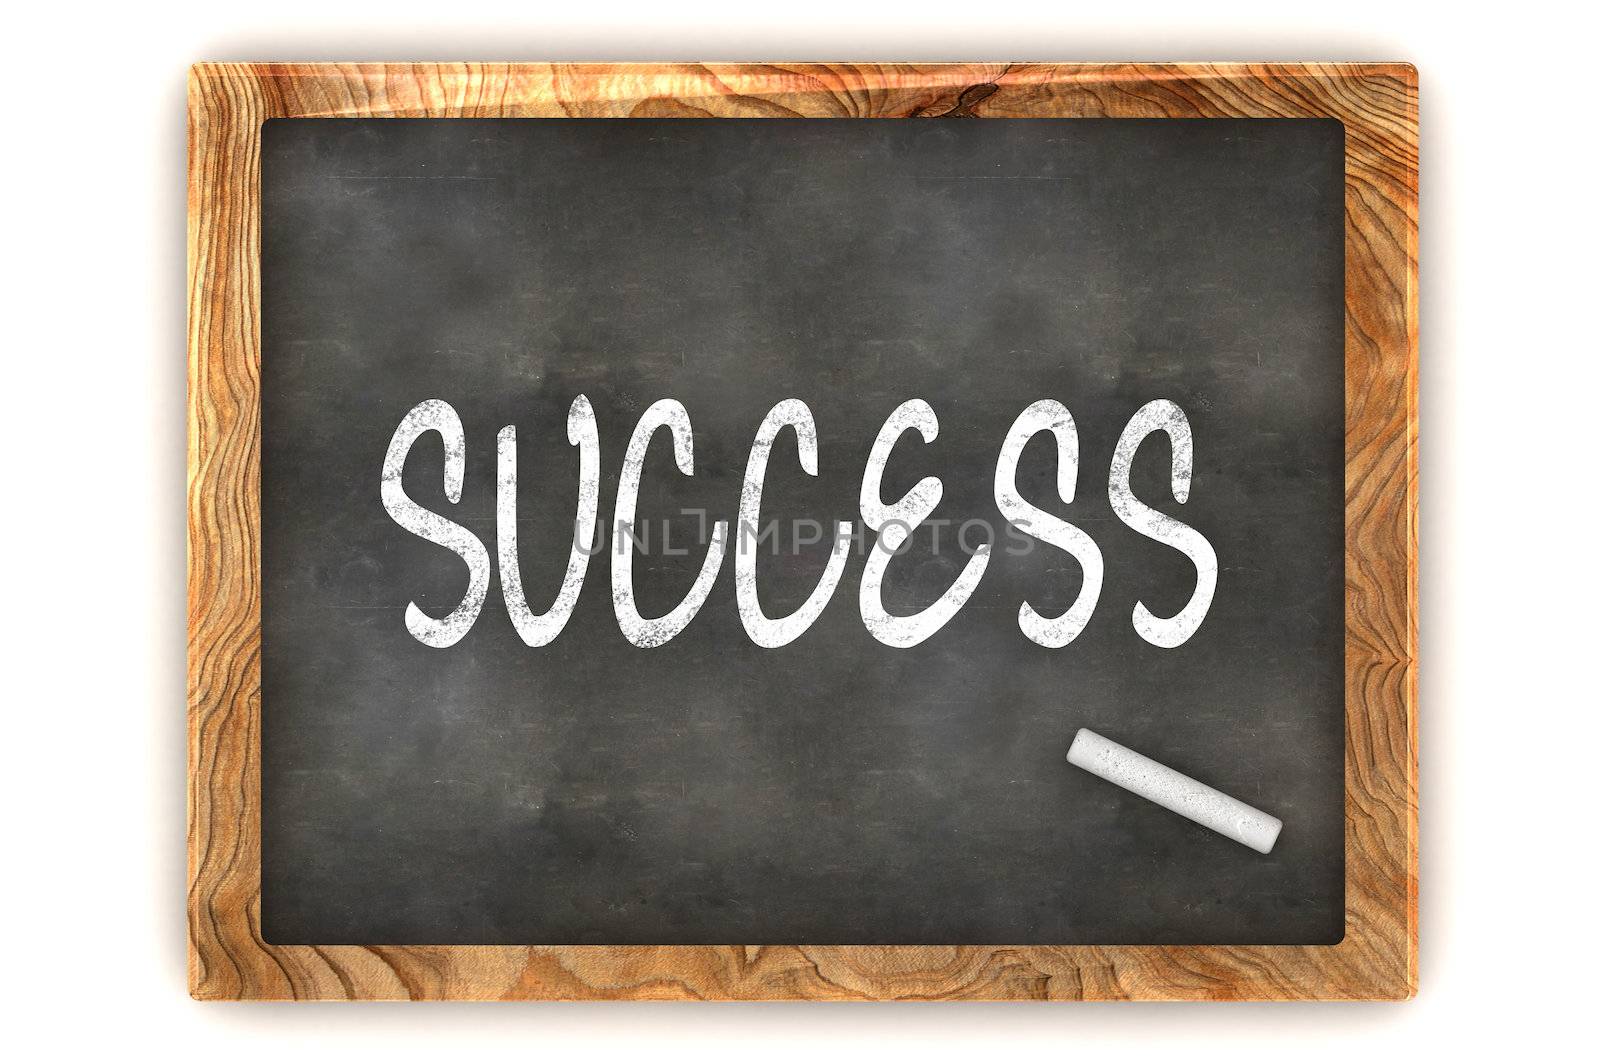 A Colourful 3d Rendered Concept Illustration showing Success writen on a Blackboard with white chalk